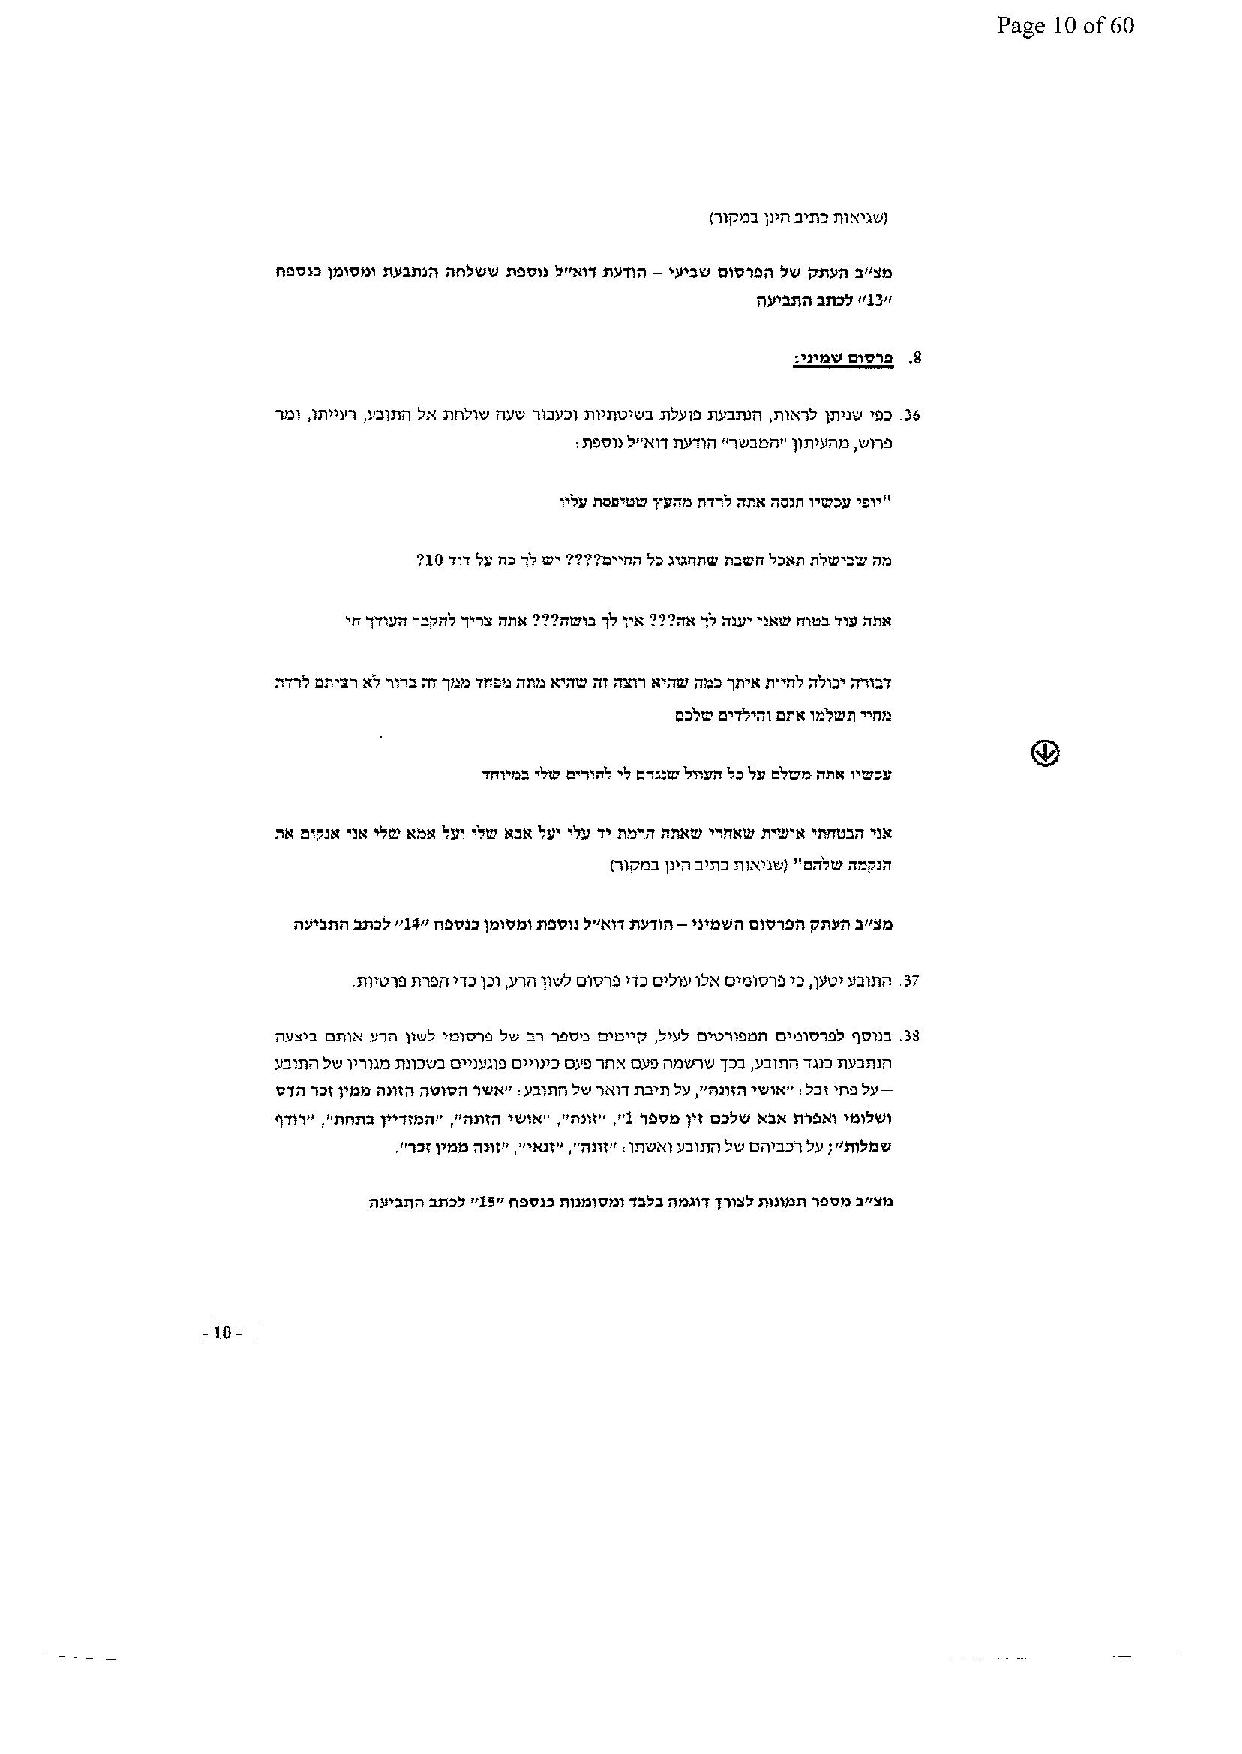 document-page-010